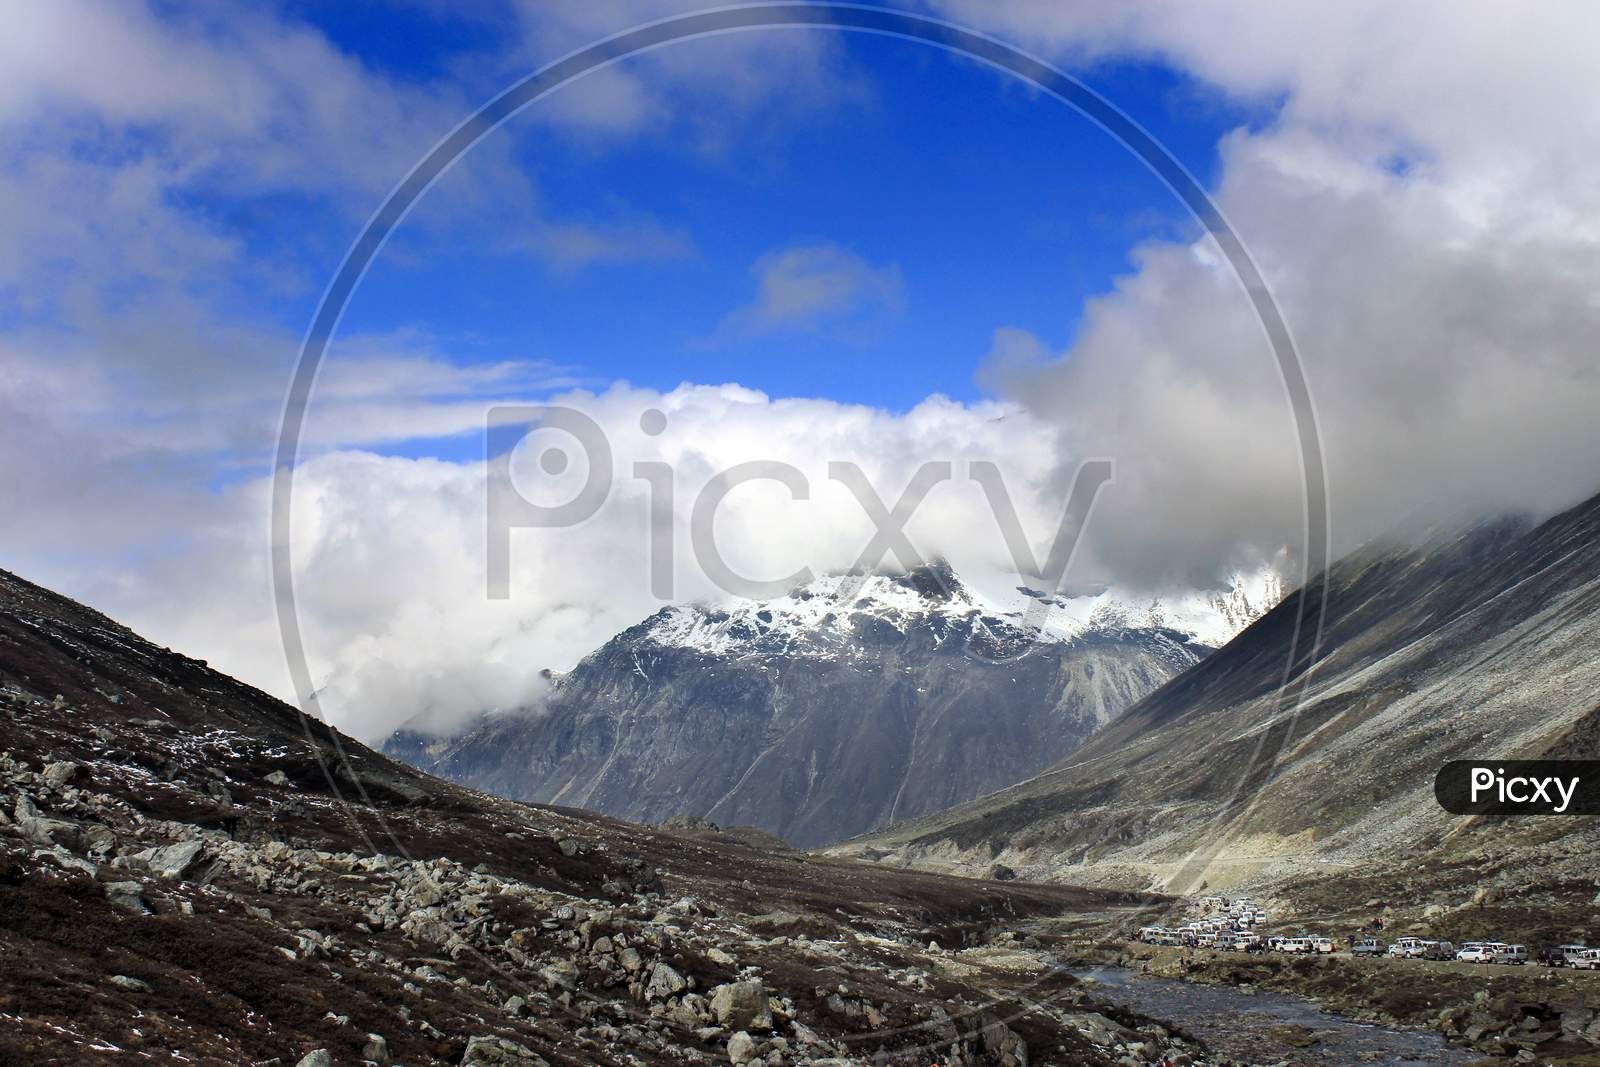 Snow Capped Mountains of Sikkim